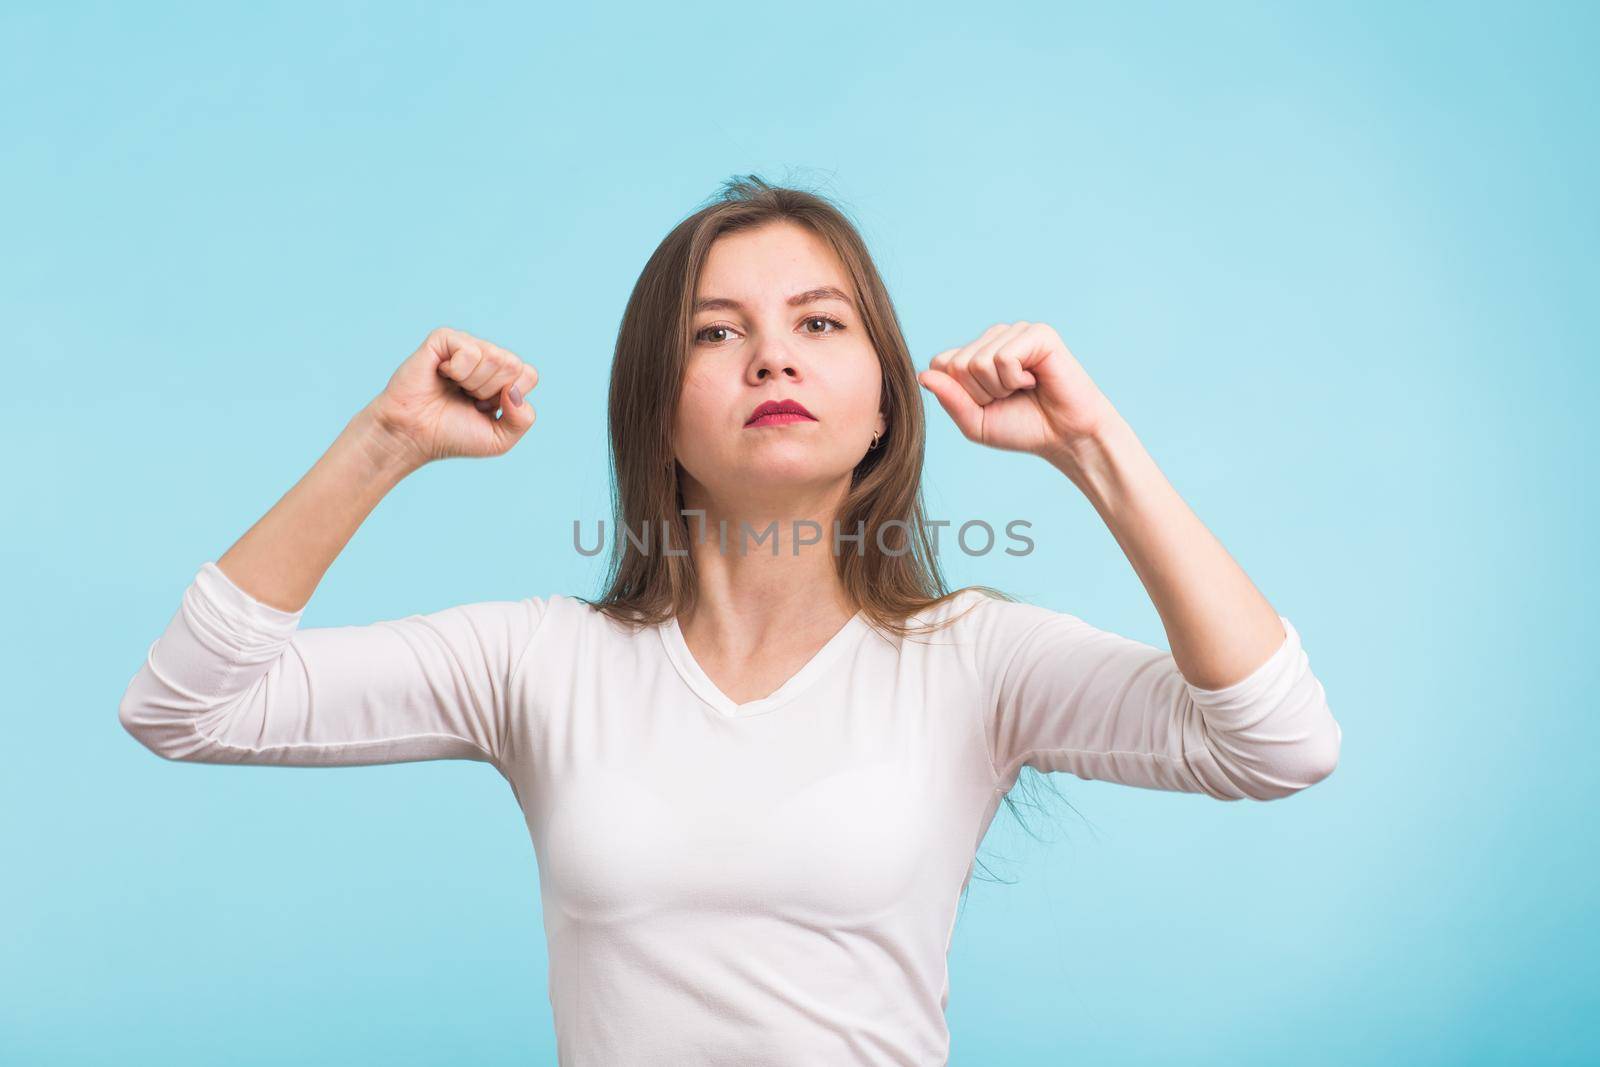 Superhero girl. Confident young woman isolated on blue background.